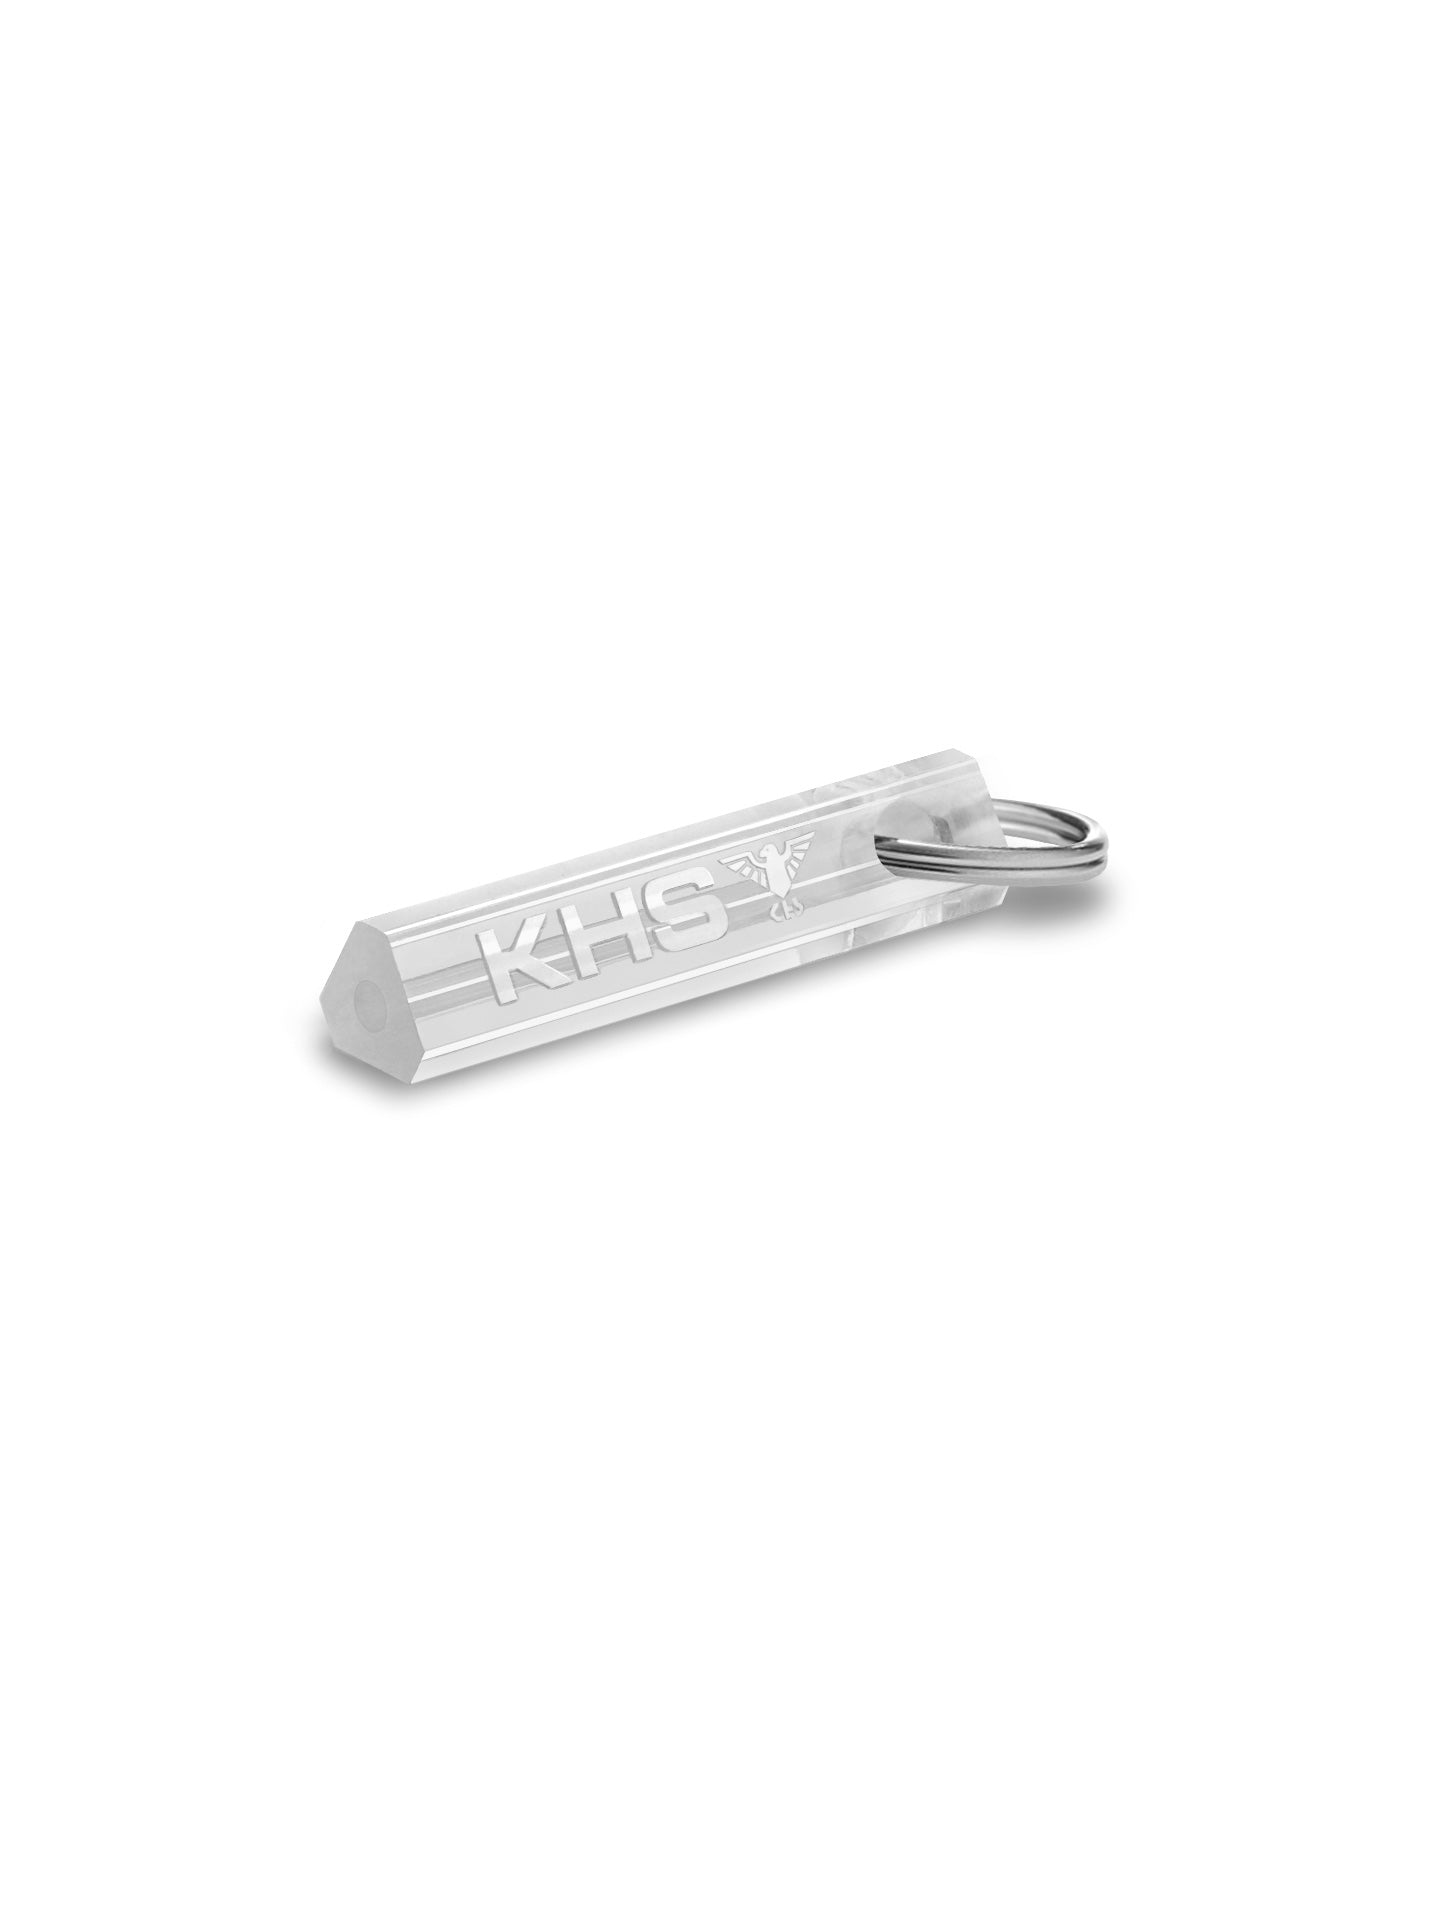 10 TRIGATAGS® with key ring